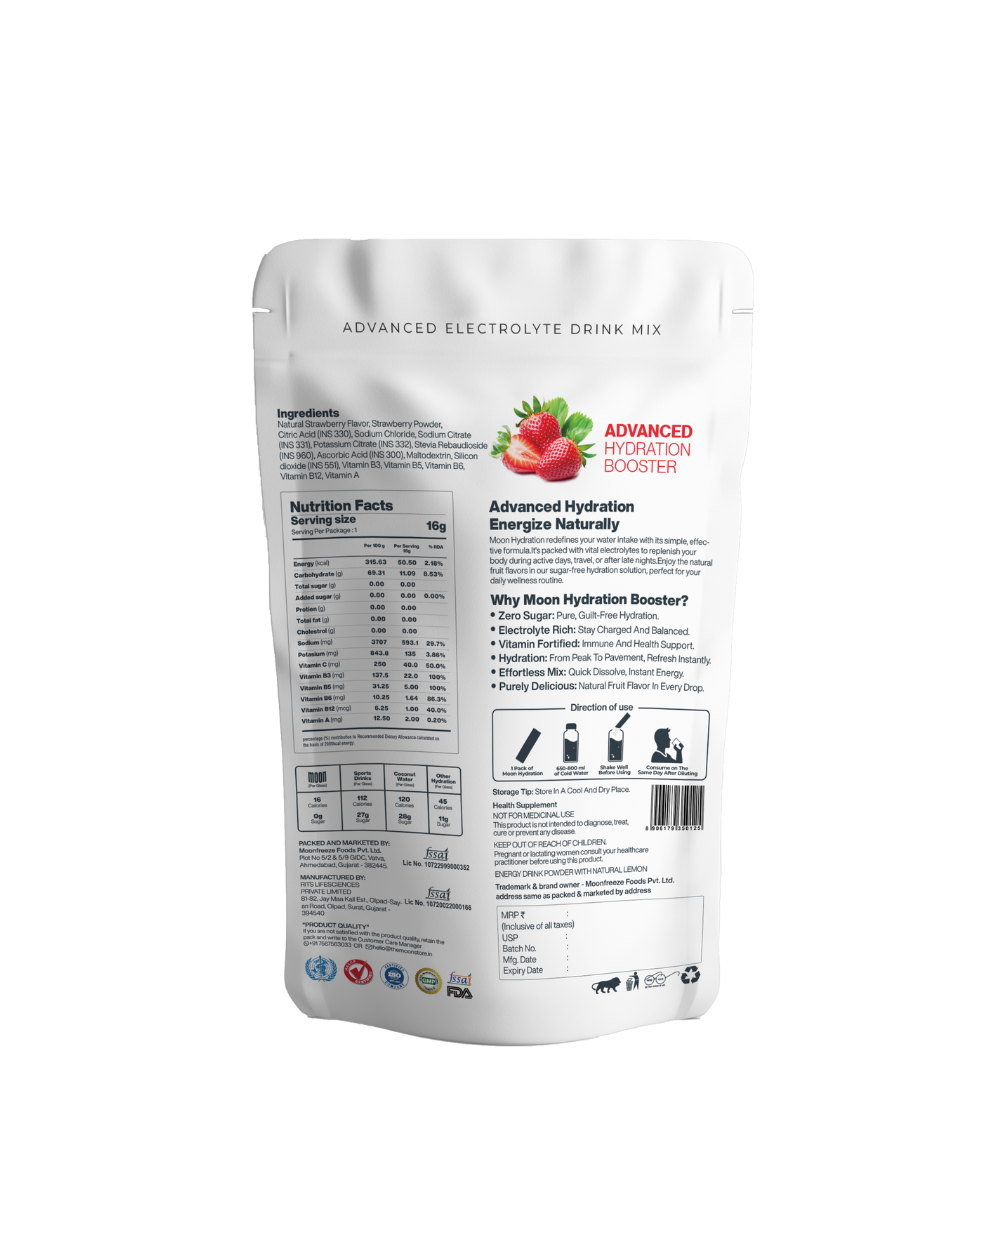 Pouch of Moon Strawberry Lunar Hydration Booster electrolyte drink mix with hydration booster benefits listed and nutritional information displayed.